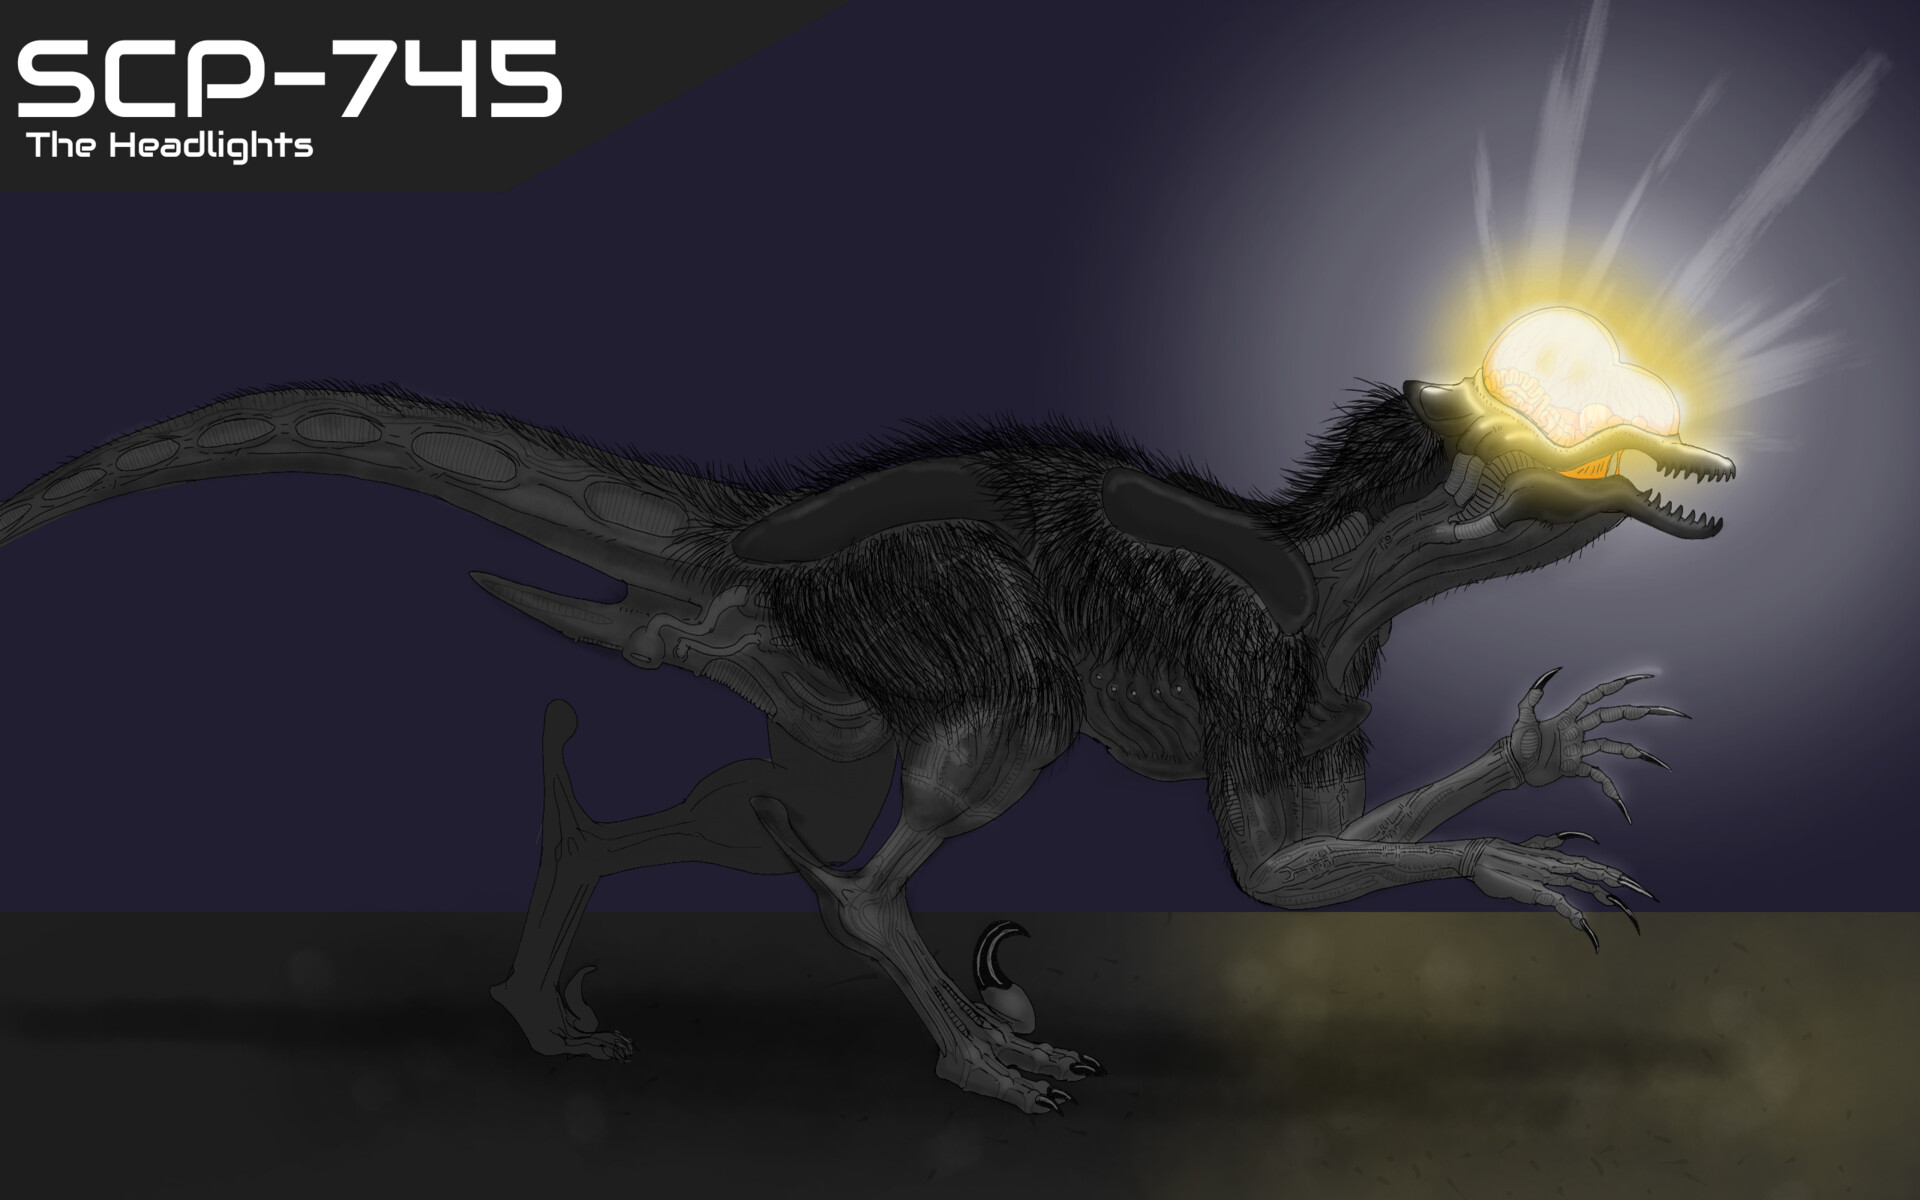 So today I decided to draw 'SCP-966' This creature gives me the